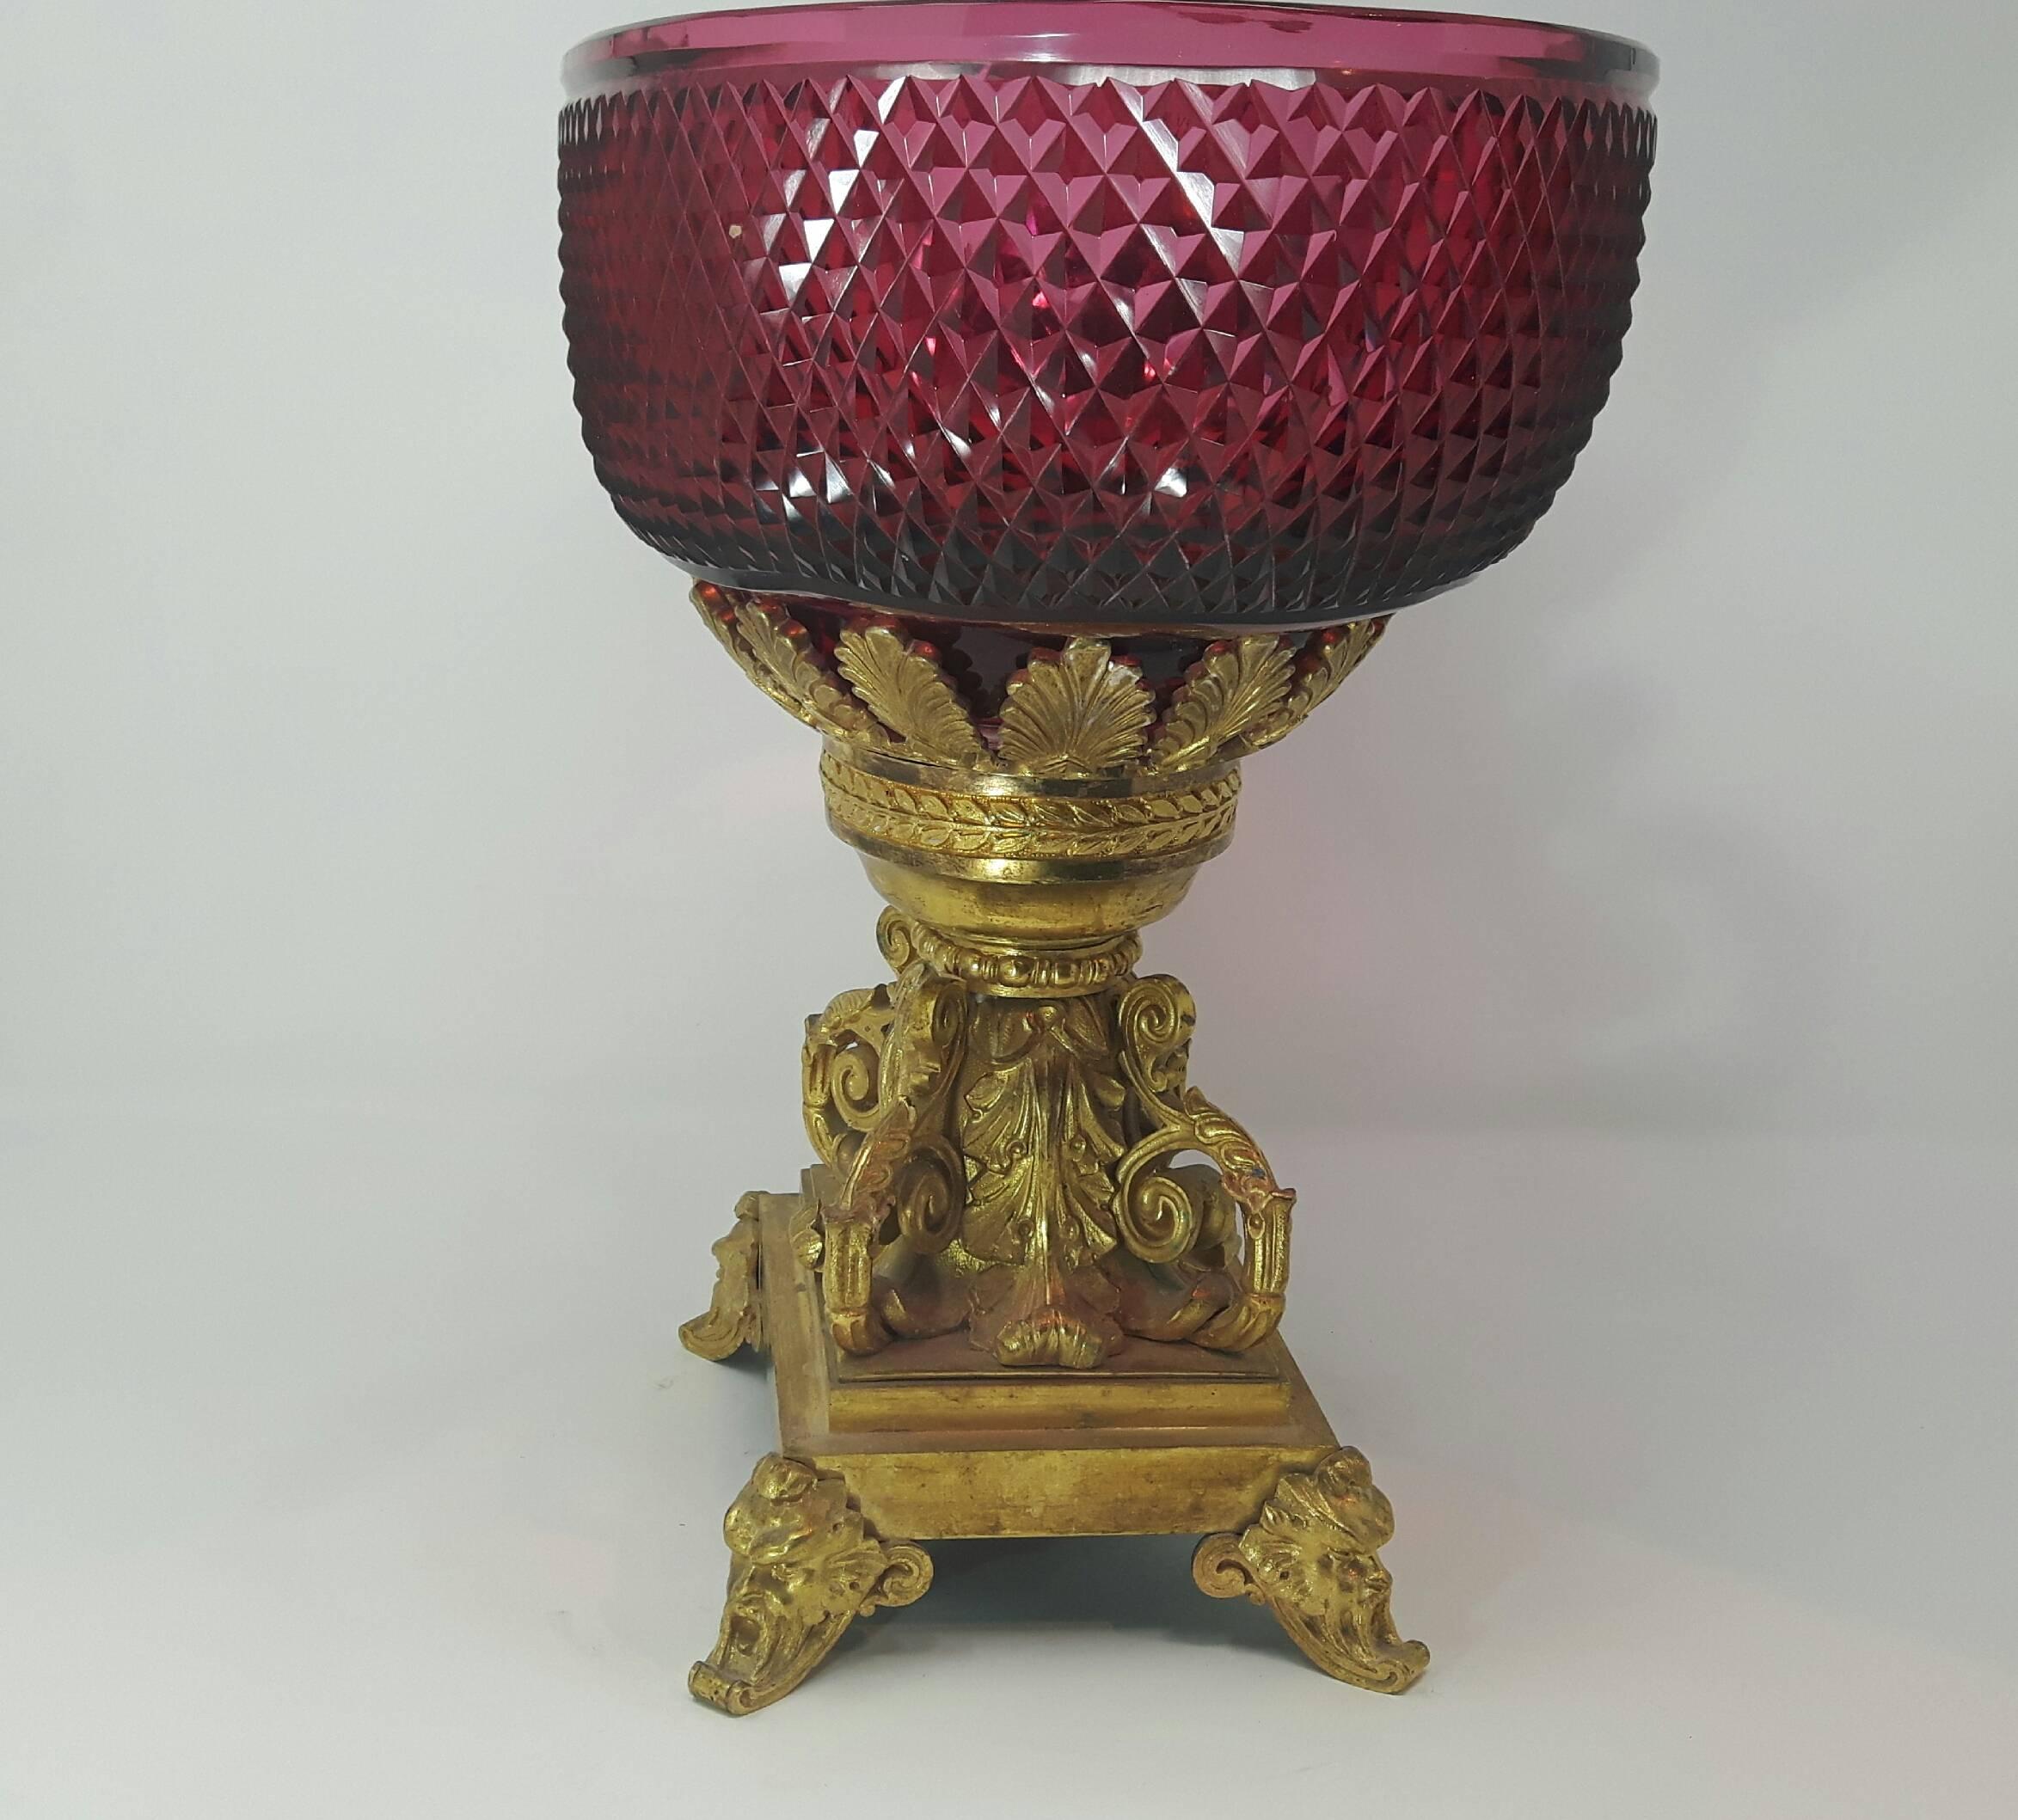 A fine hand-cut ruby red crystal and gilt bronze center piece.